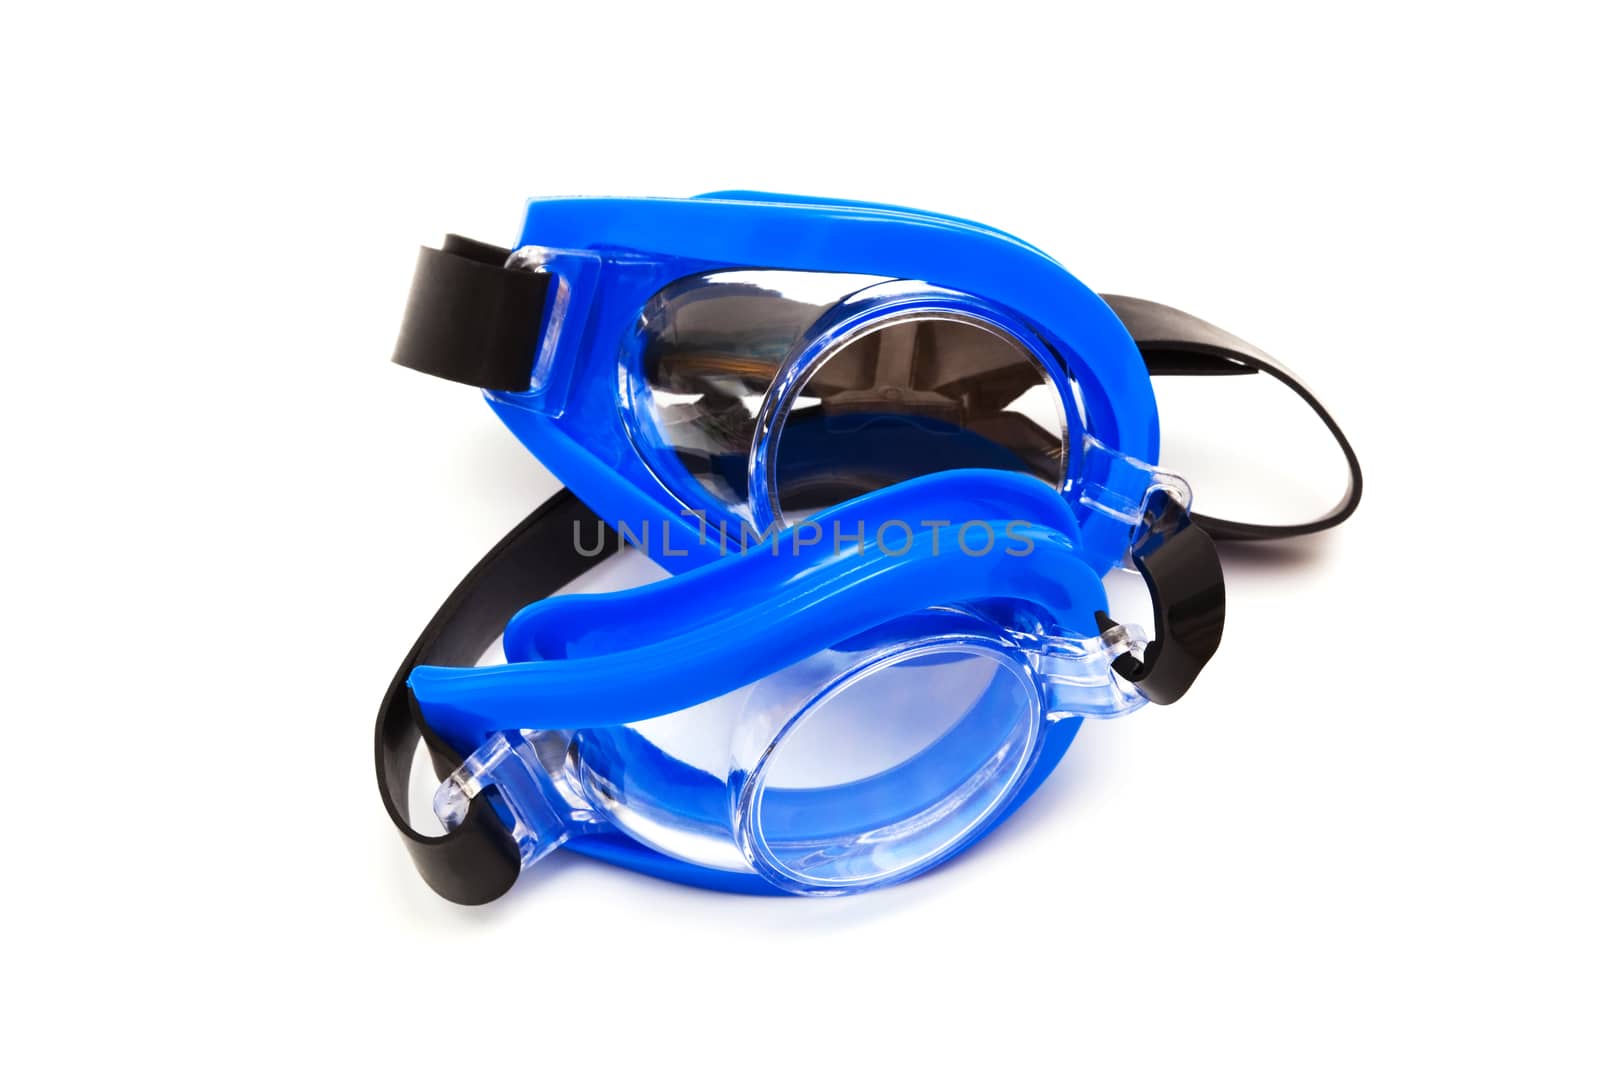 goggles for swimming by terex